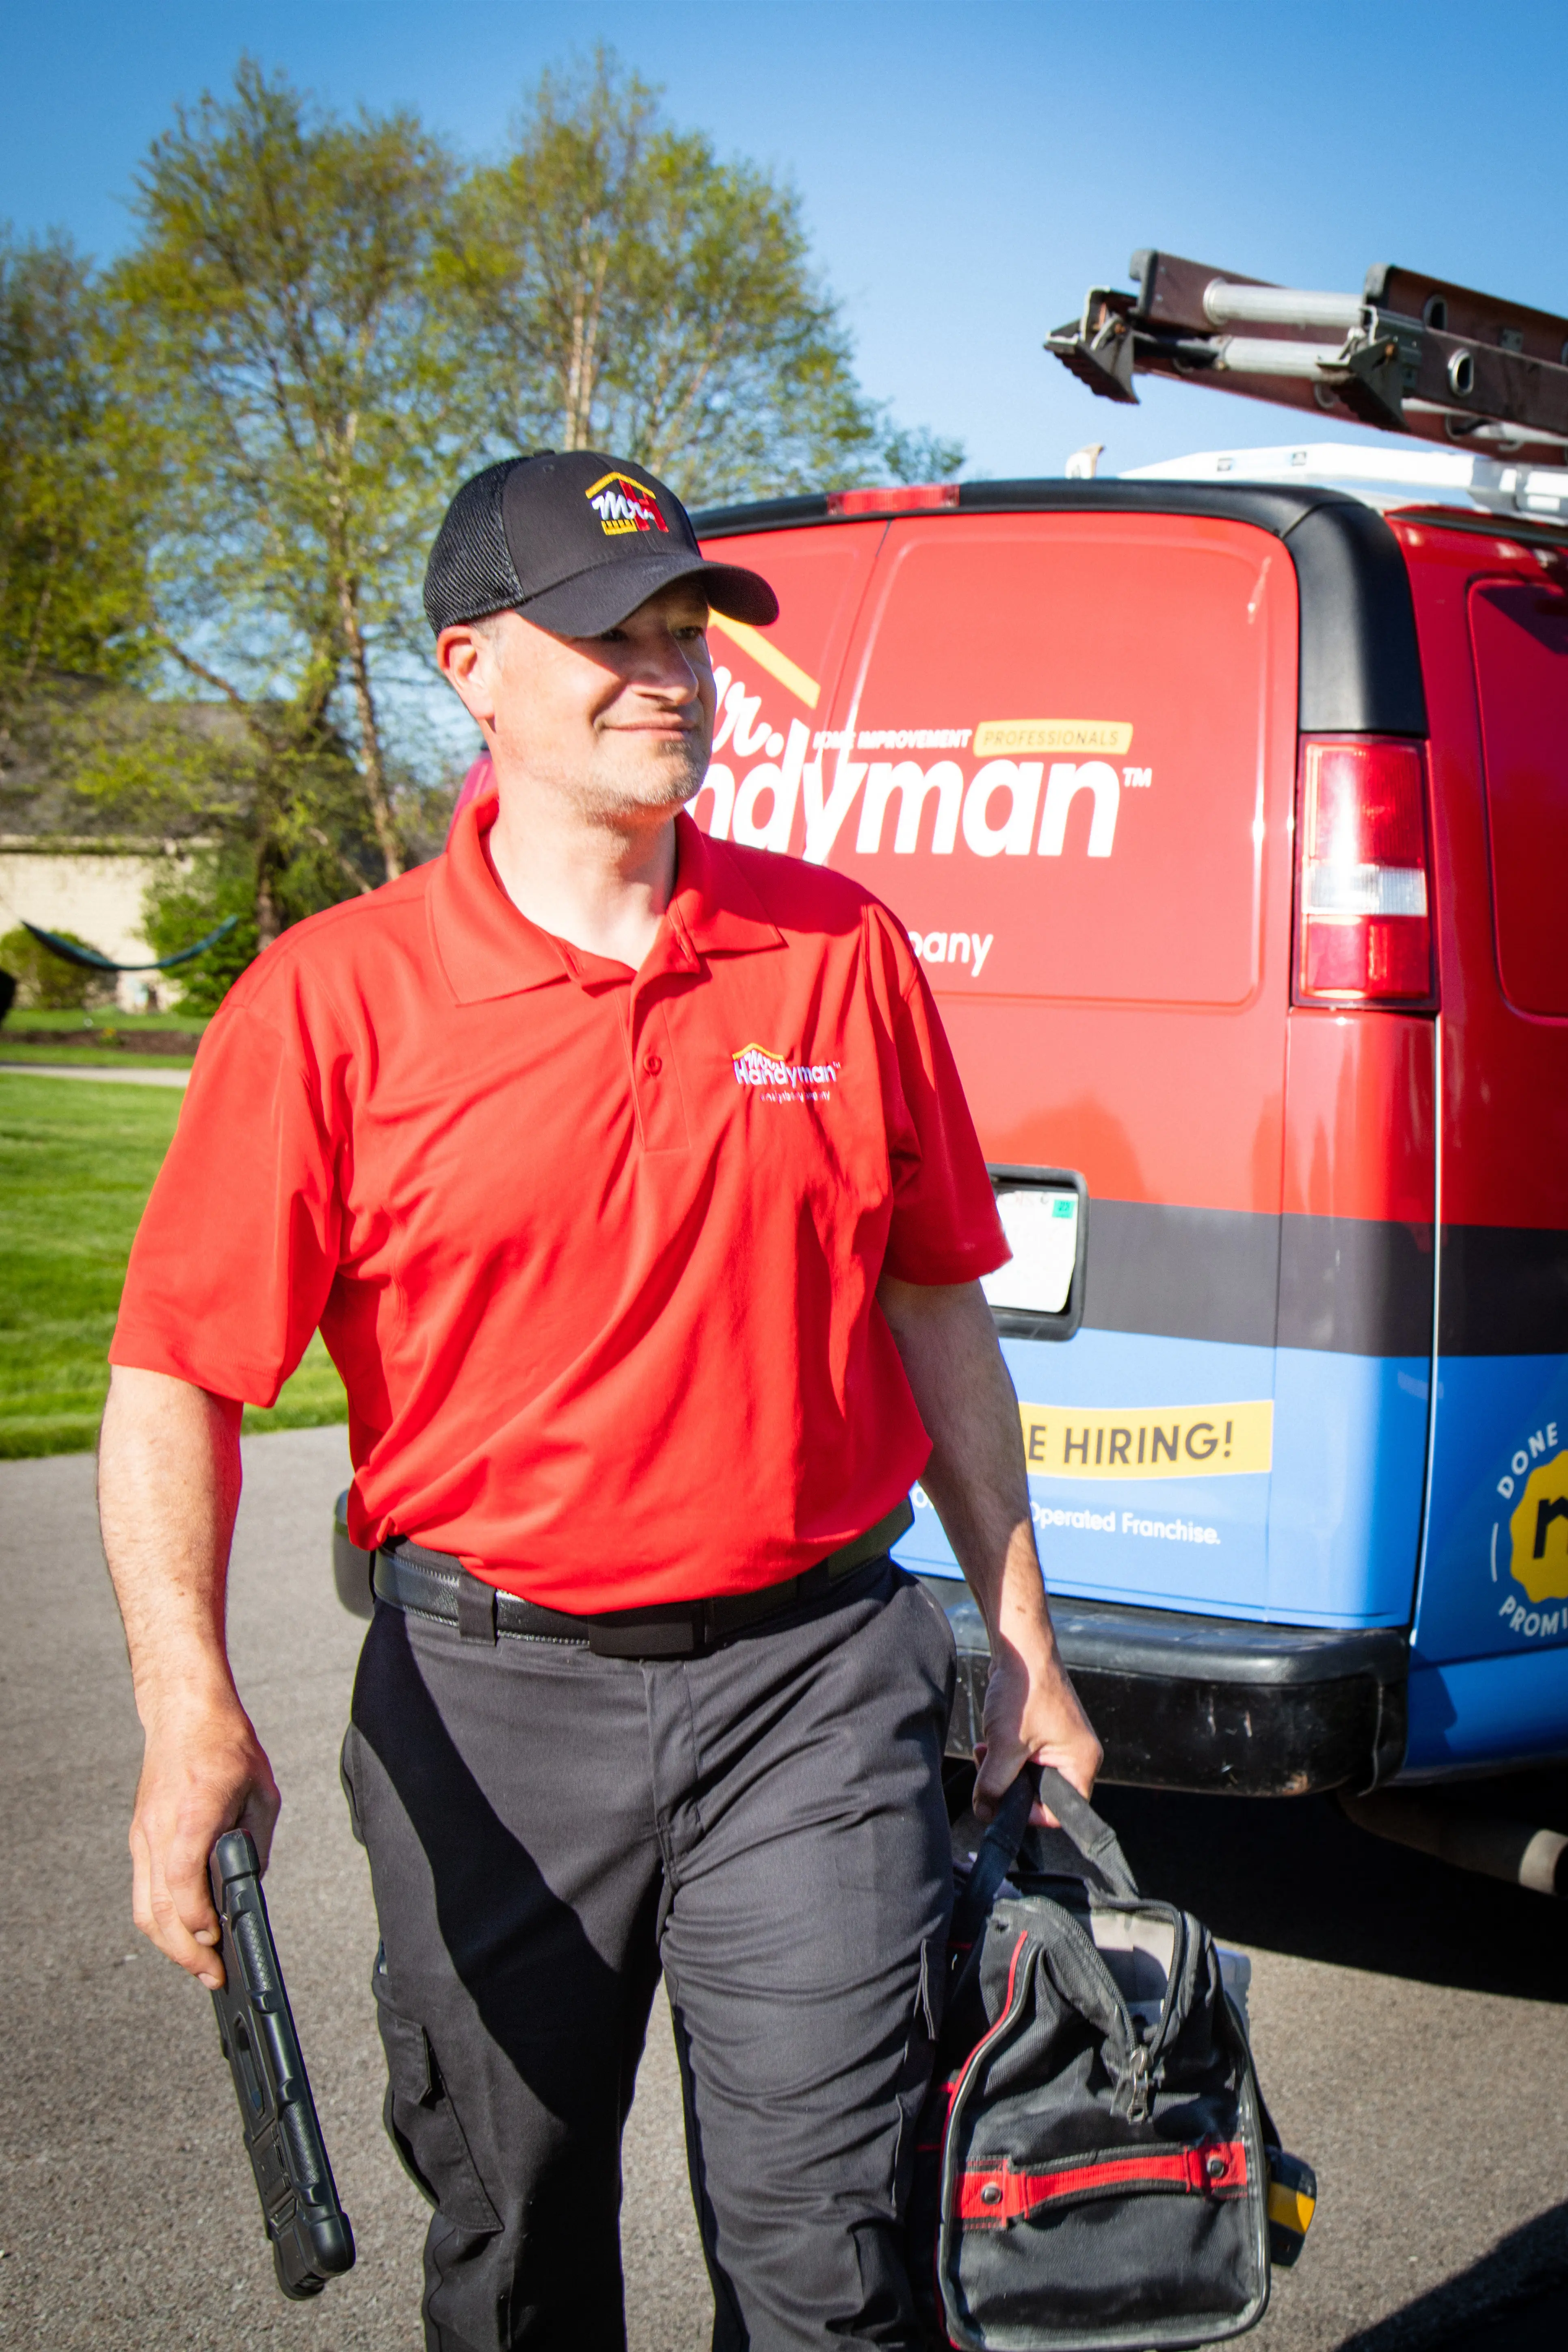 Mr. Handyman walking from service van to perform safety and mobility services in a customer's home.